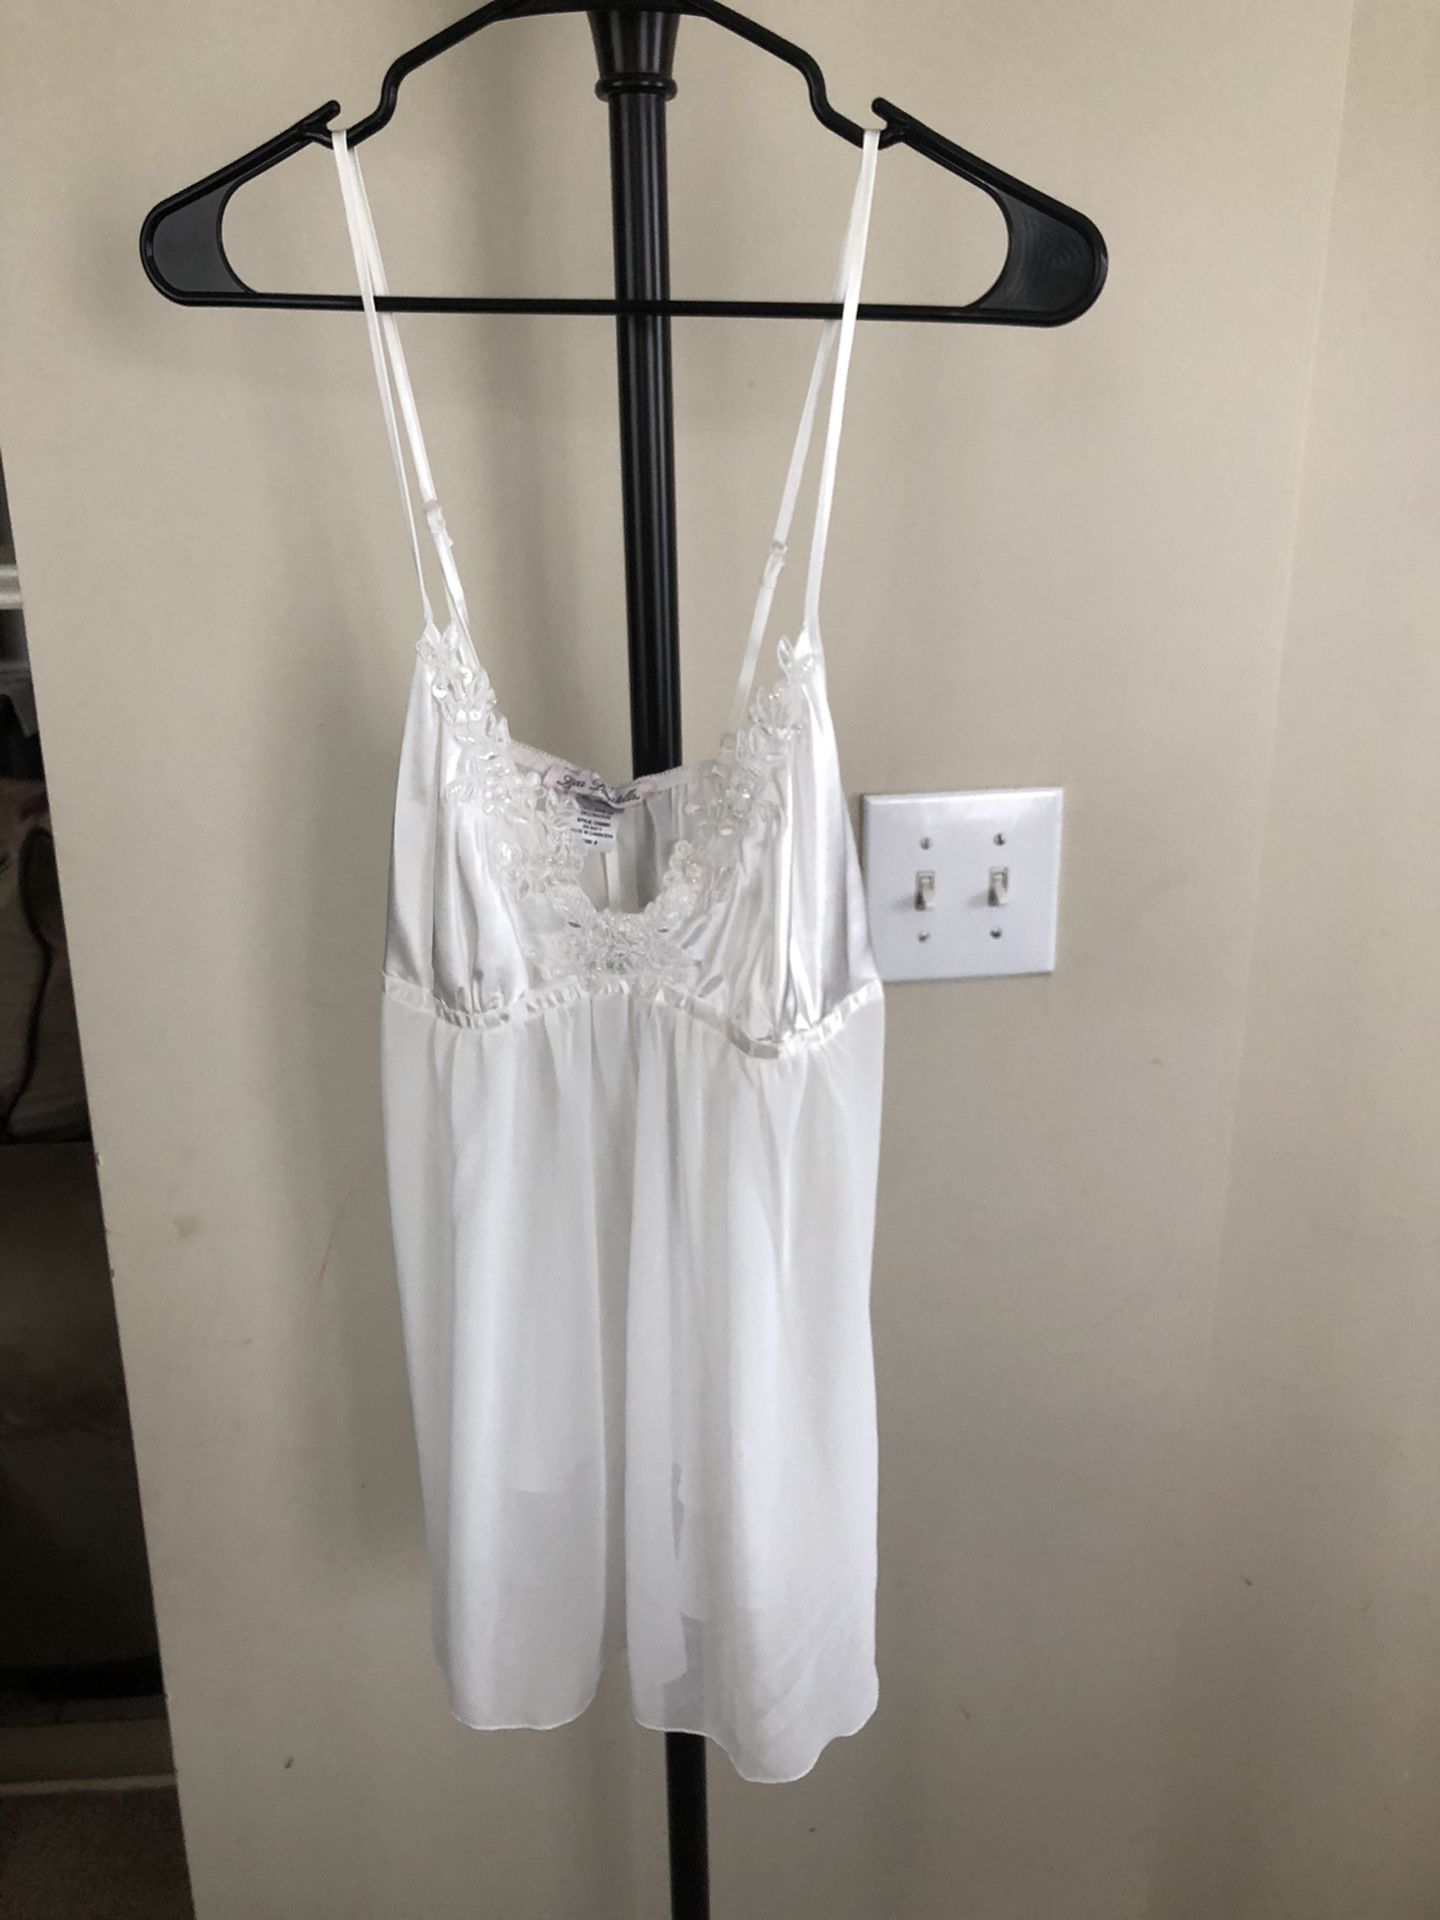 Women’s  Nightgowns Set Size  S 